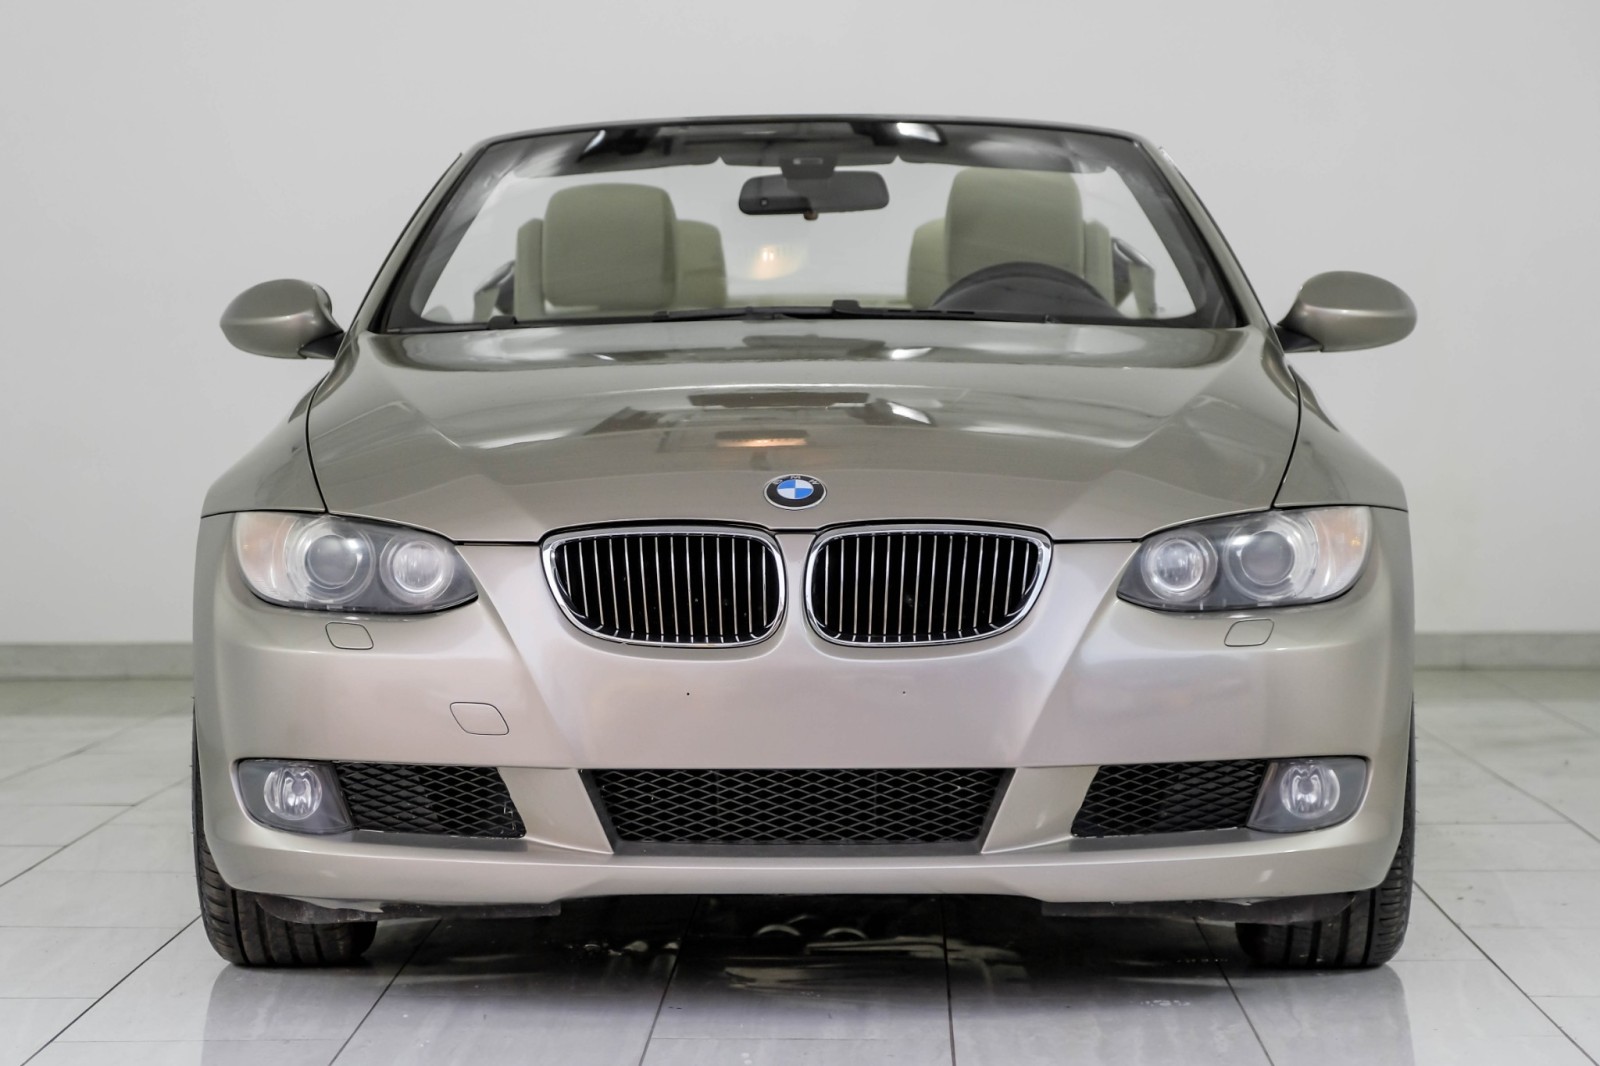 2007 BMW 328i Convertible AUTOMATIC LEATHER HEATED SEATS PUSH BUTTON START D 6